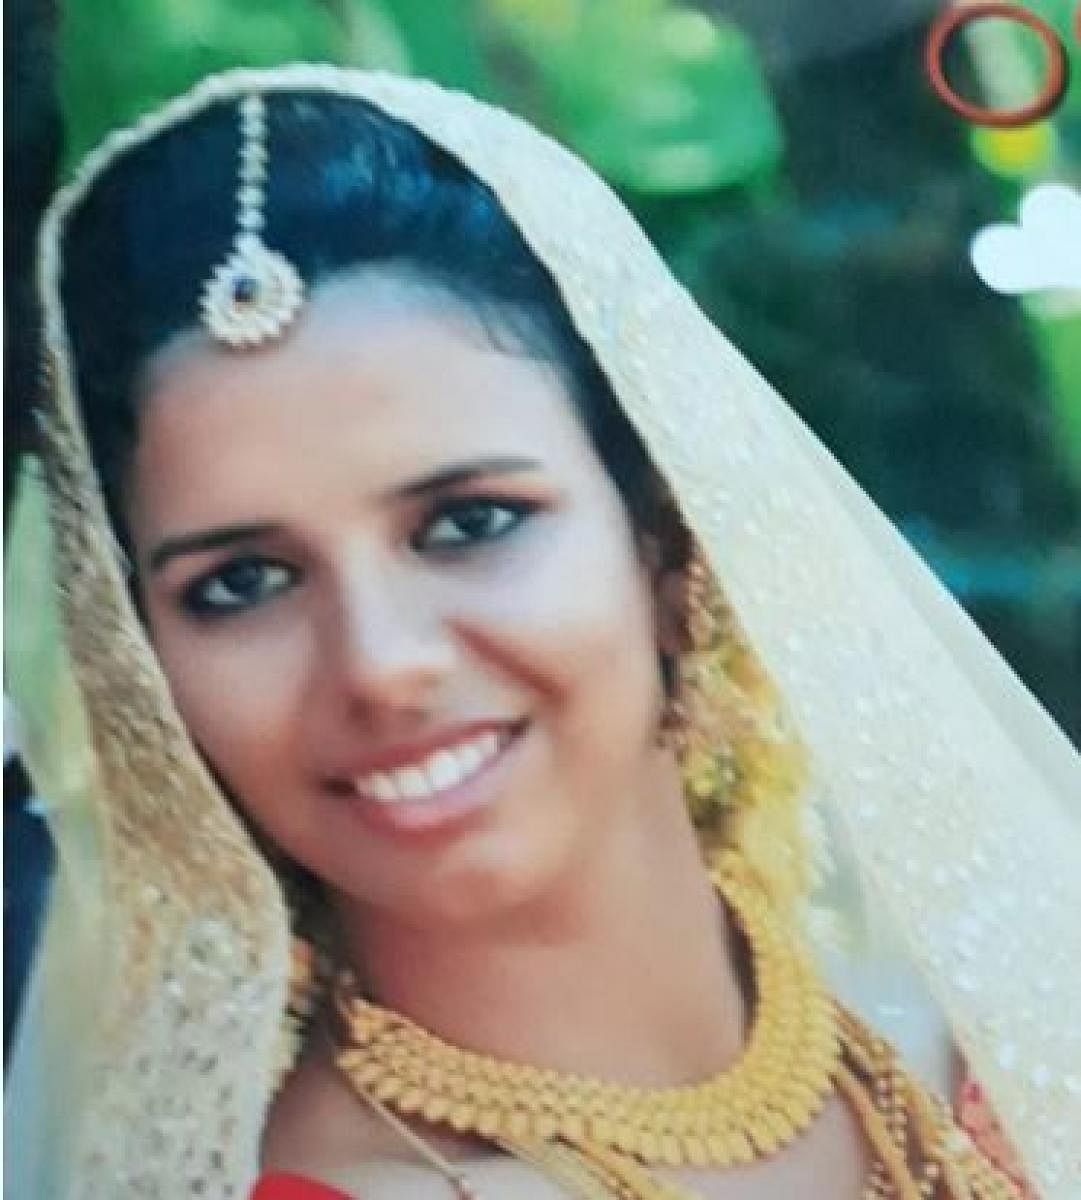 Anzi from Thrissur was killed in the mosque attack, her family said on March 16.